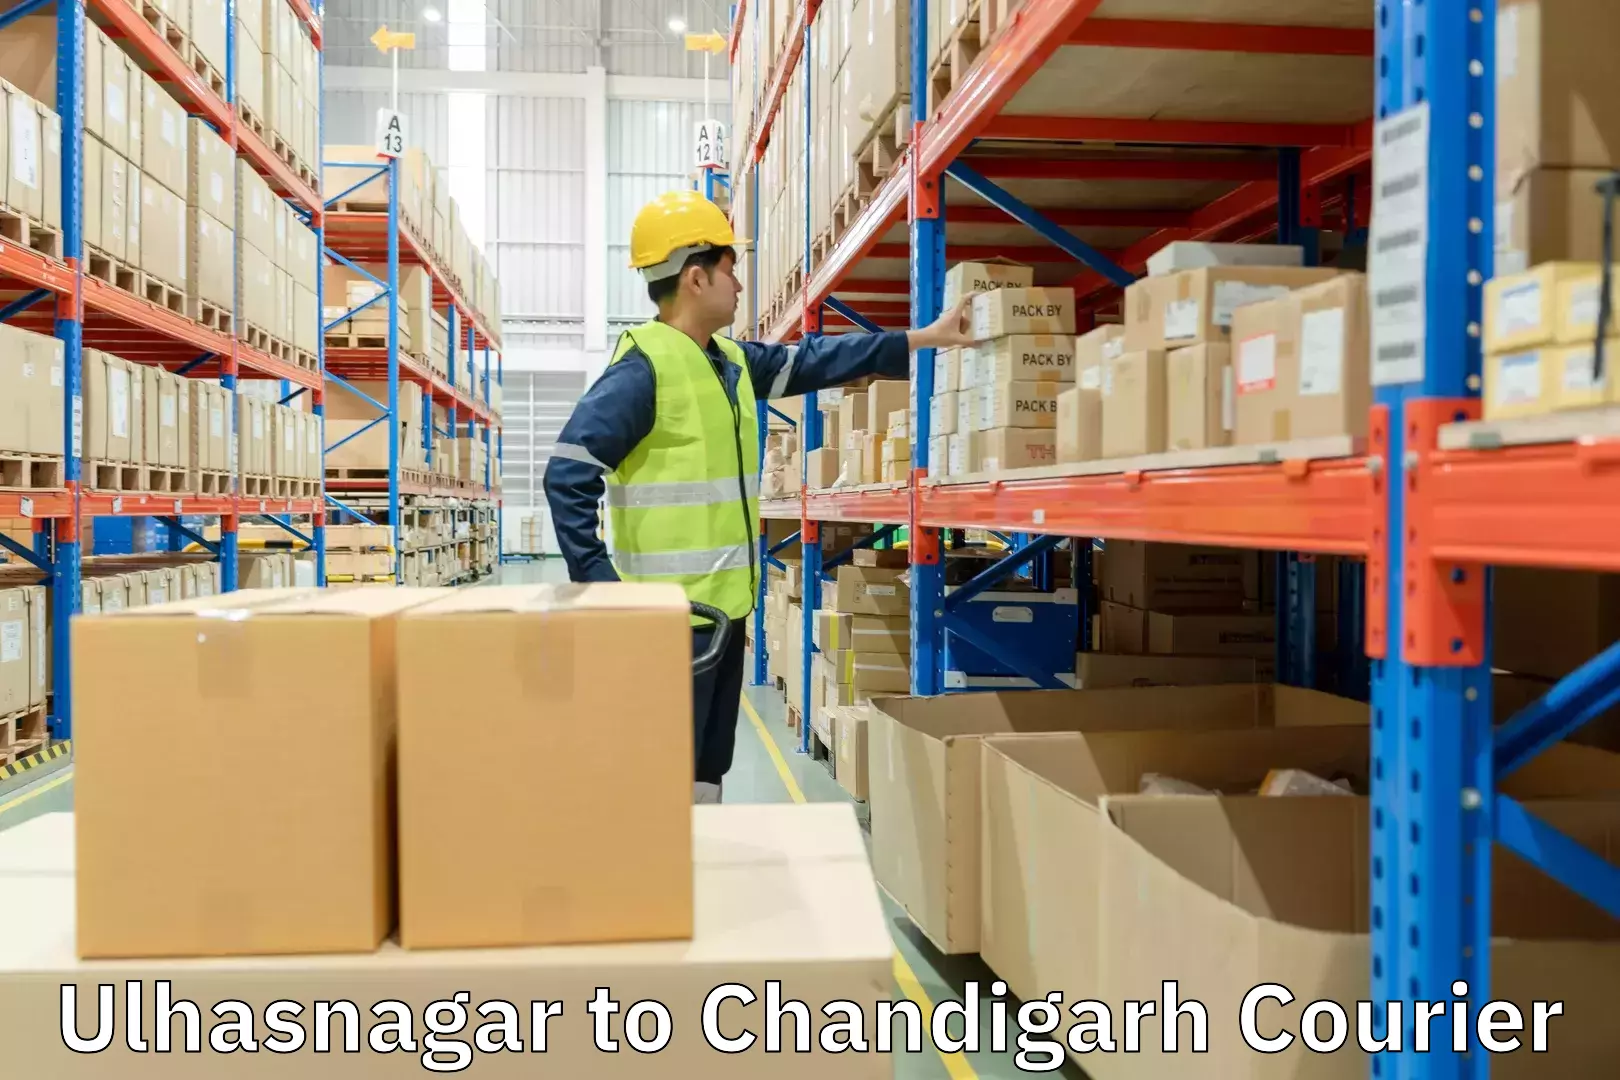 On-call courier service Ulhasnagar to Chandigarh